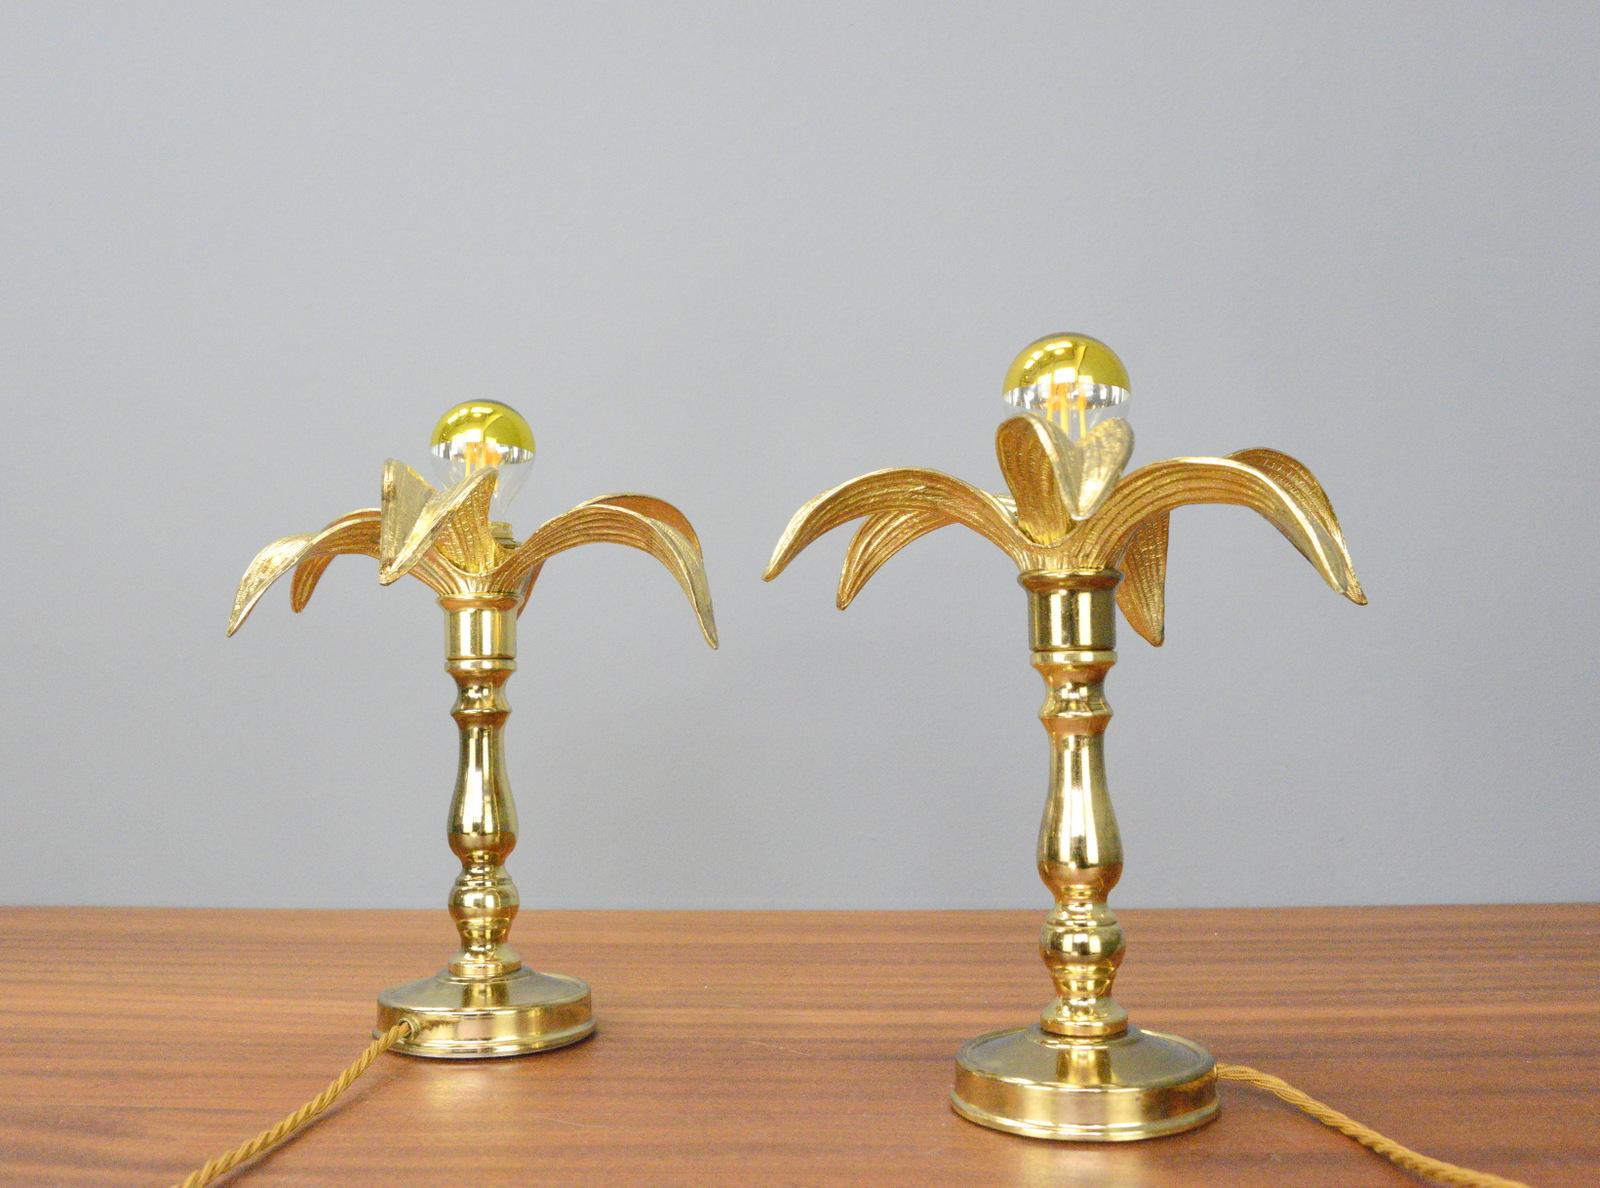 Hollywood Regency Table Lamps By Massive circa 1970s

- Each light takes 1x E14 fitting bulbs
- Cast brass with gold paint
- Designed By Willy Daro
- Made by Massive
- Belgian ~ 1970s
- 23cm wide x 22cm tall x 22cm deep

Condition